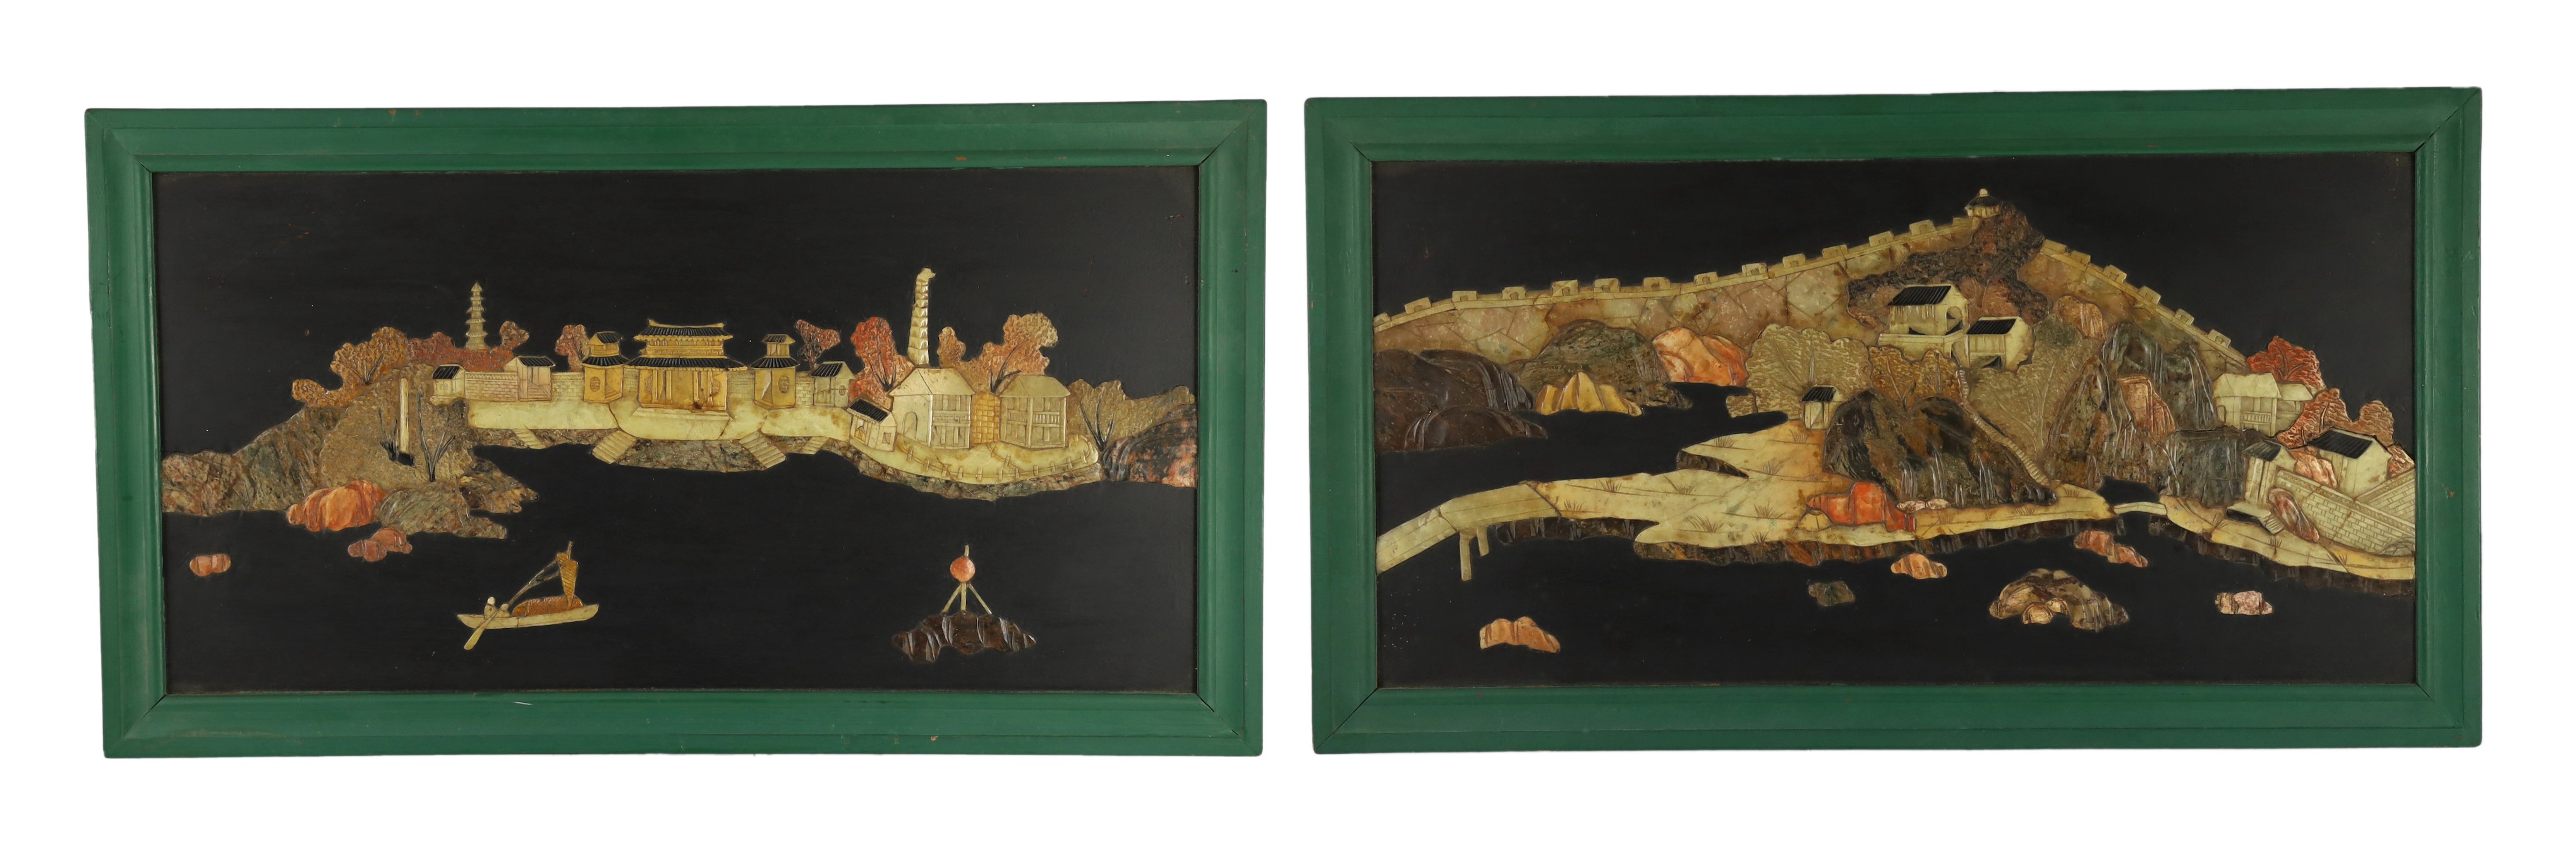 A pair of Chinese soapstone overlaid landscape panels, early 20th century, each panel including frame 33.5cm x 59cm                                                                                                         